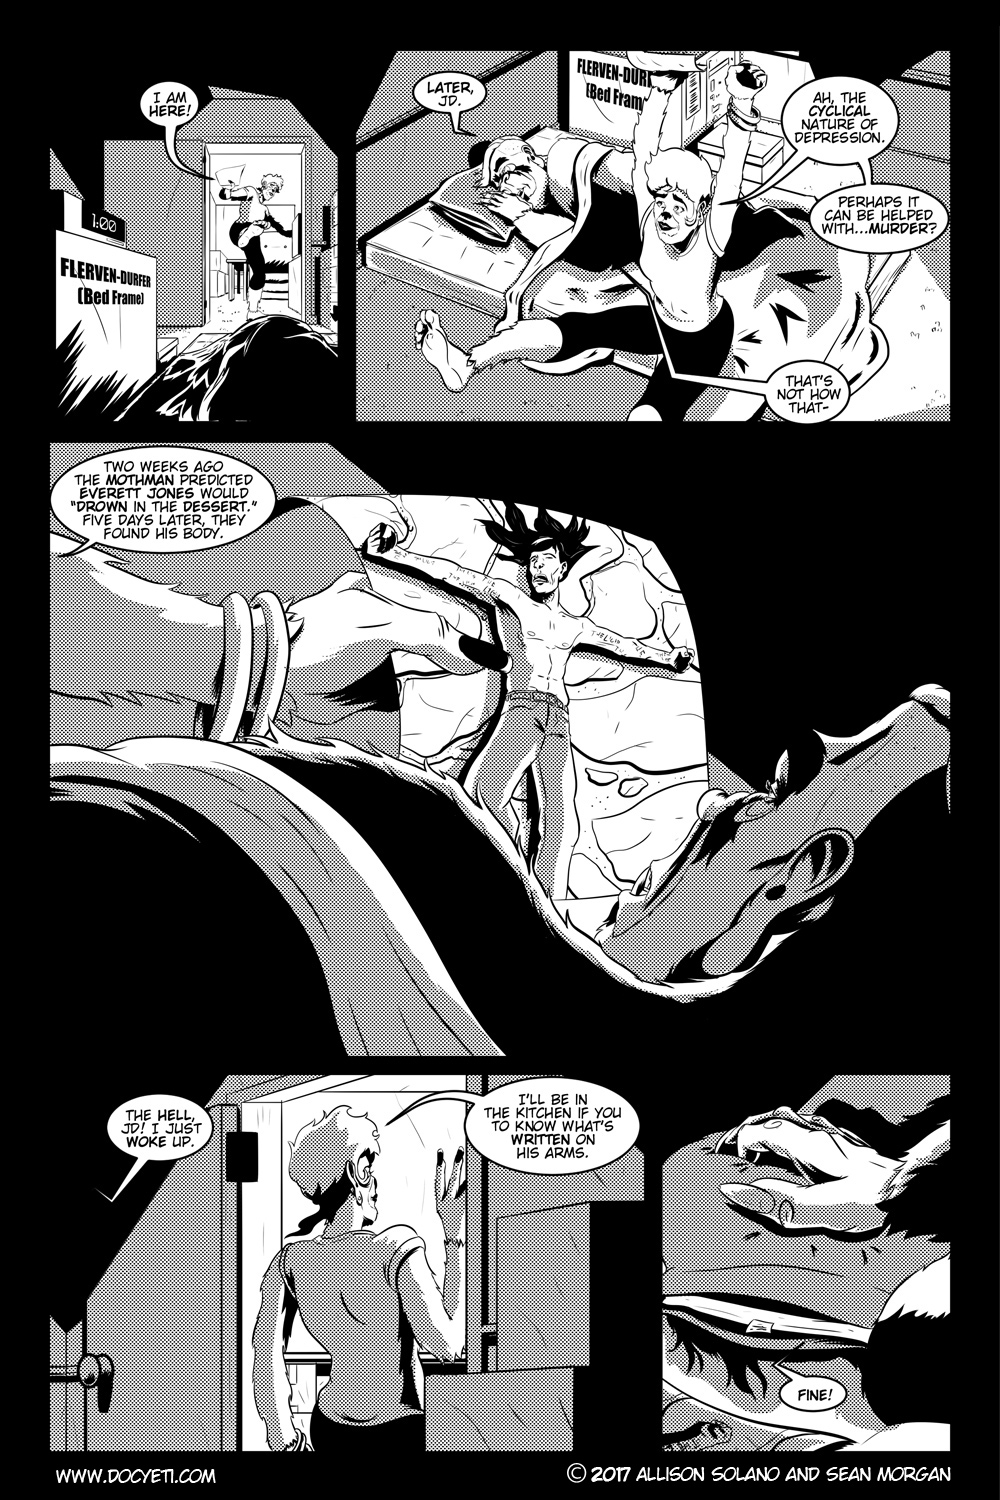 Flight of the Mothman! Issue 1 page 2